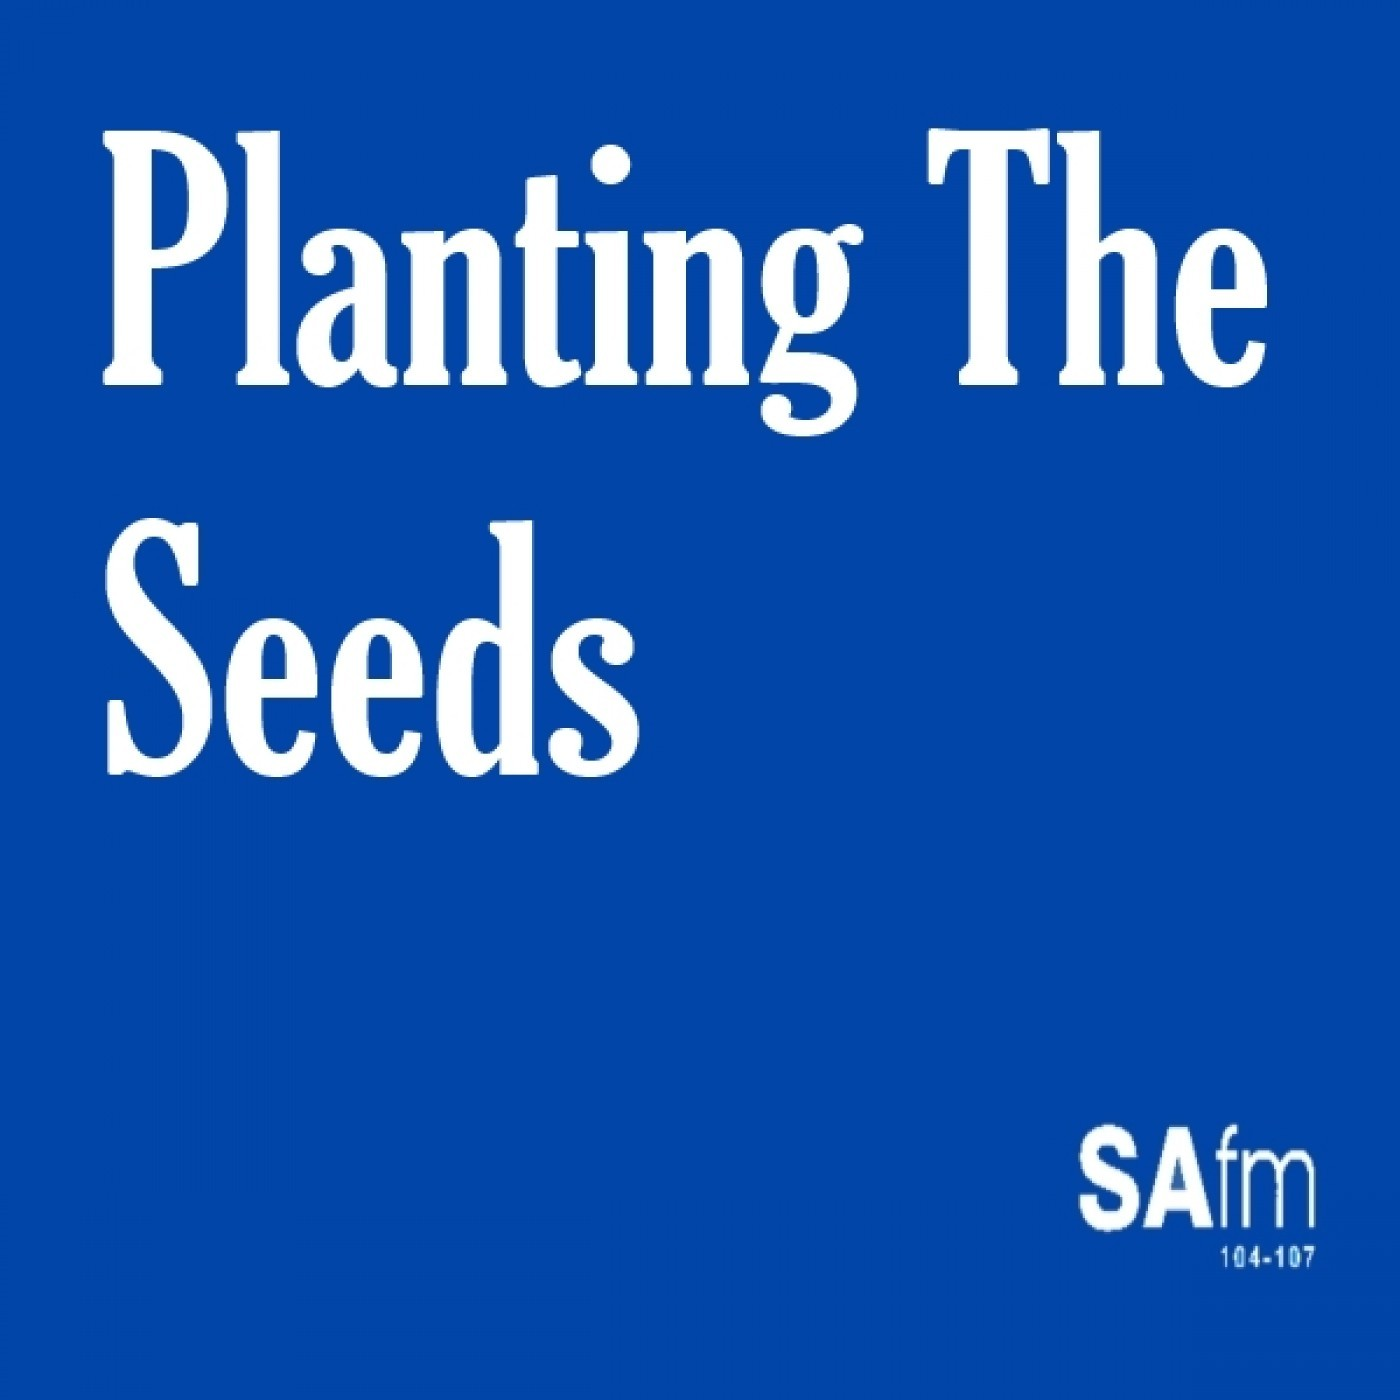 19-03-2019 PLANTING THE SEEDS